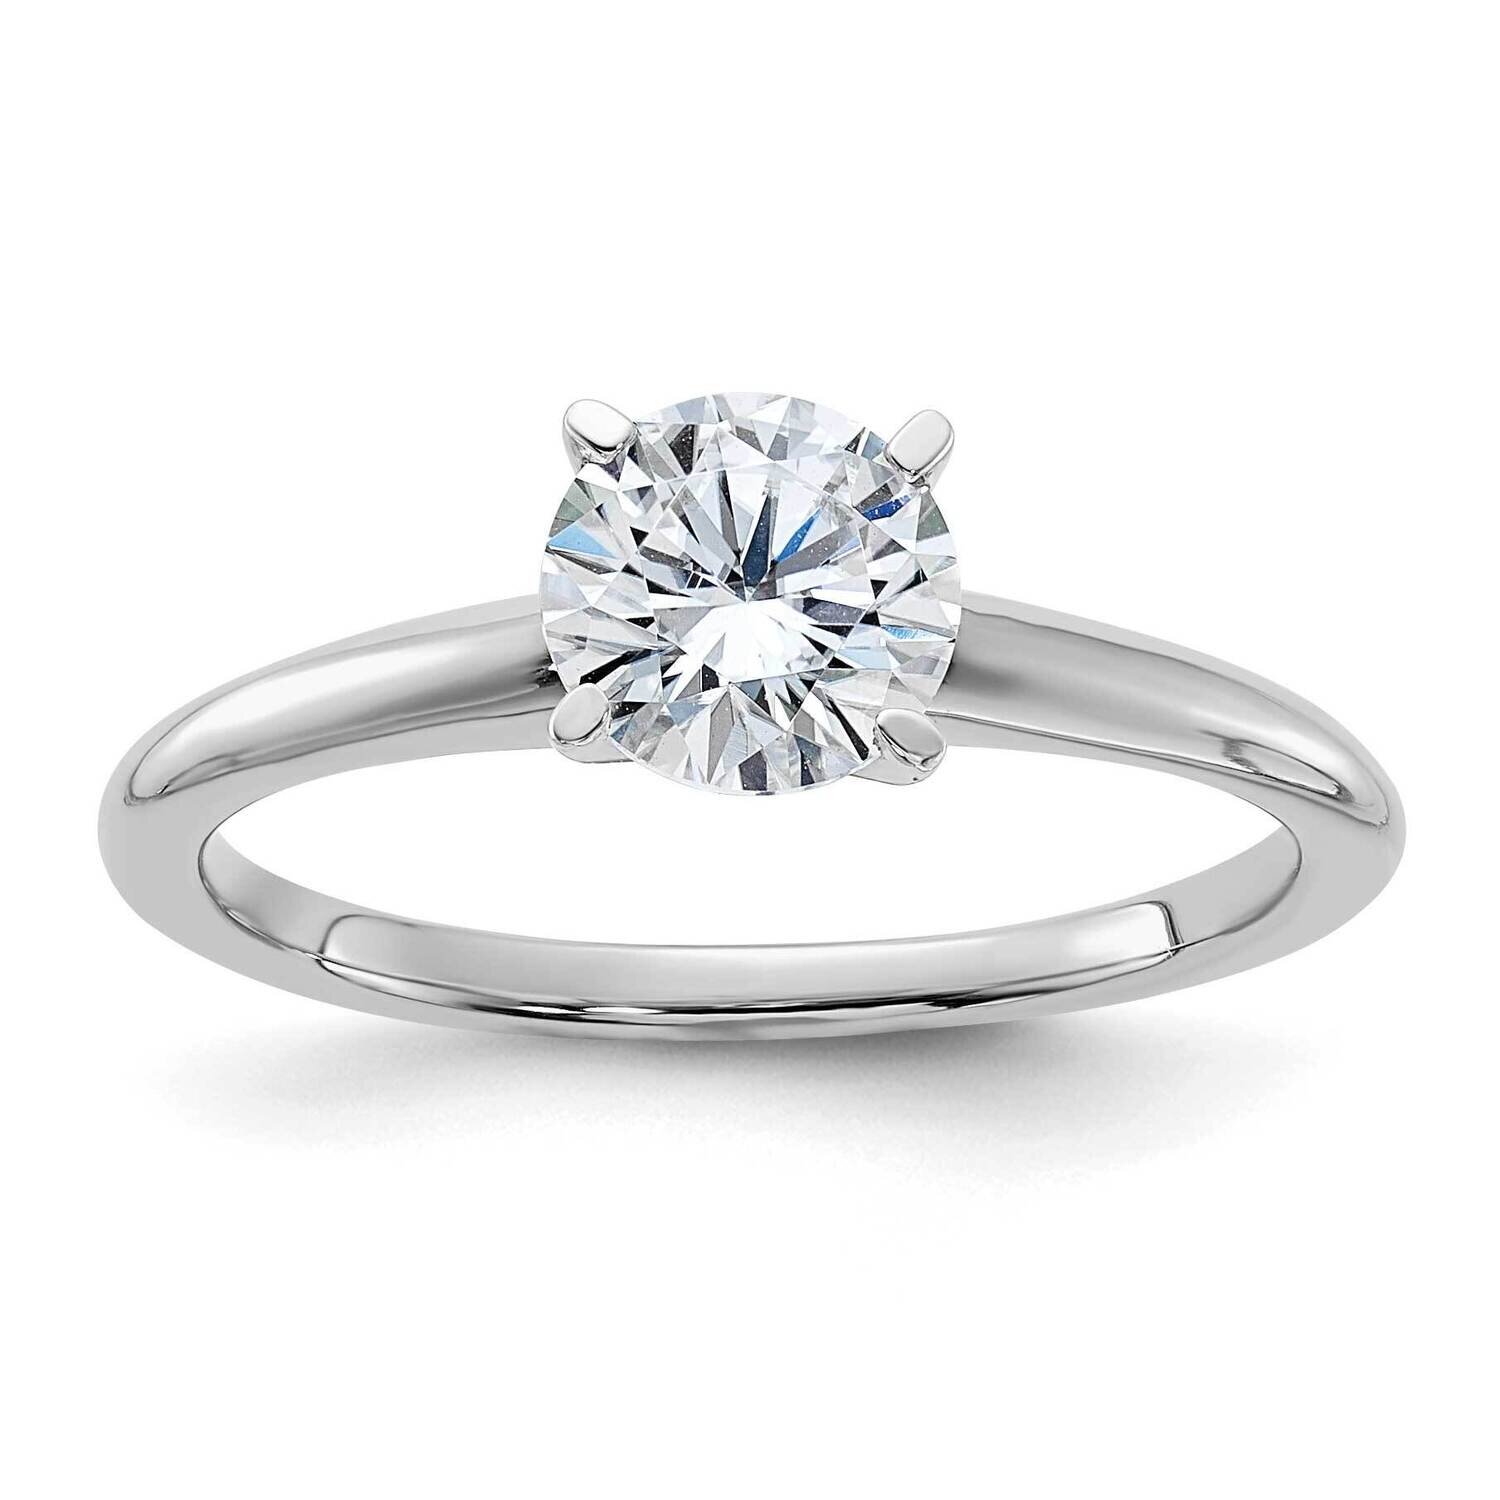 1ct. D E F Pure Light Round Moissanite Solitaire Ring 14k White Gold RM5965WR-100-7MP